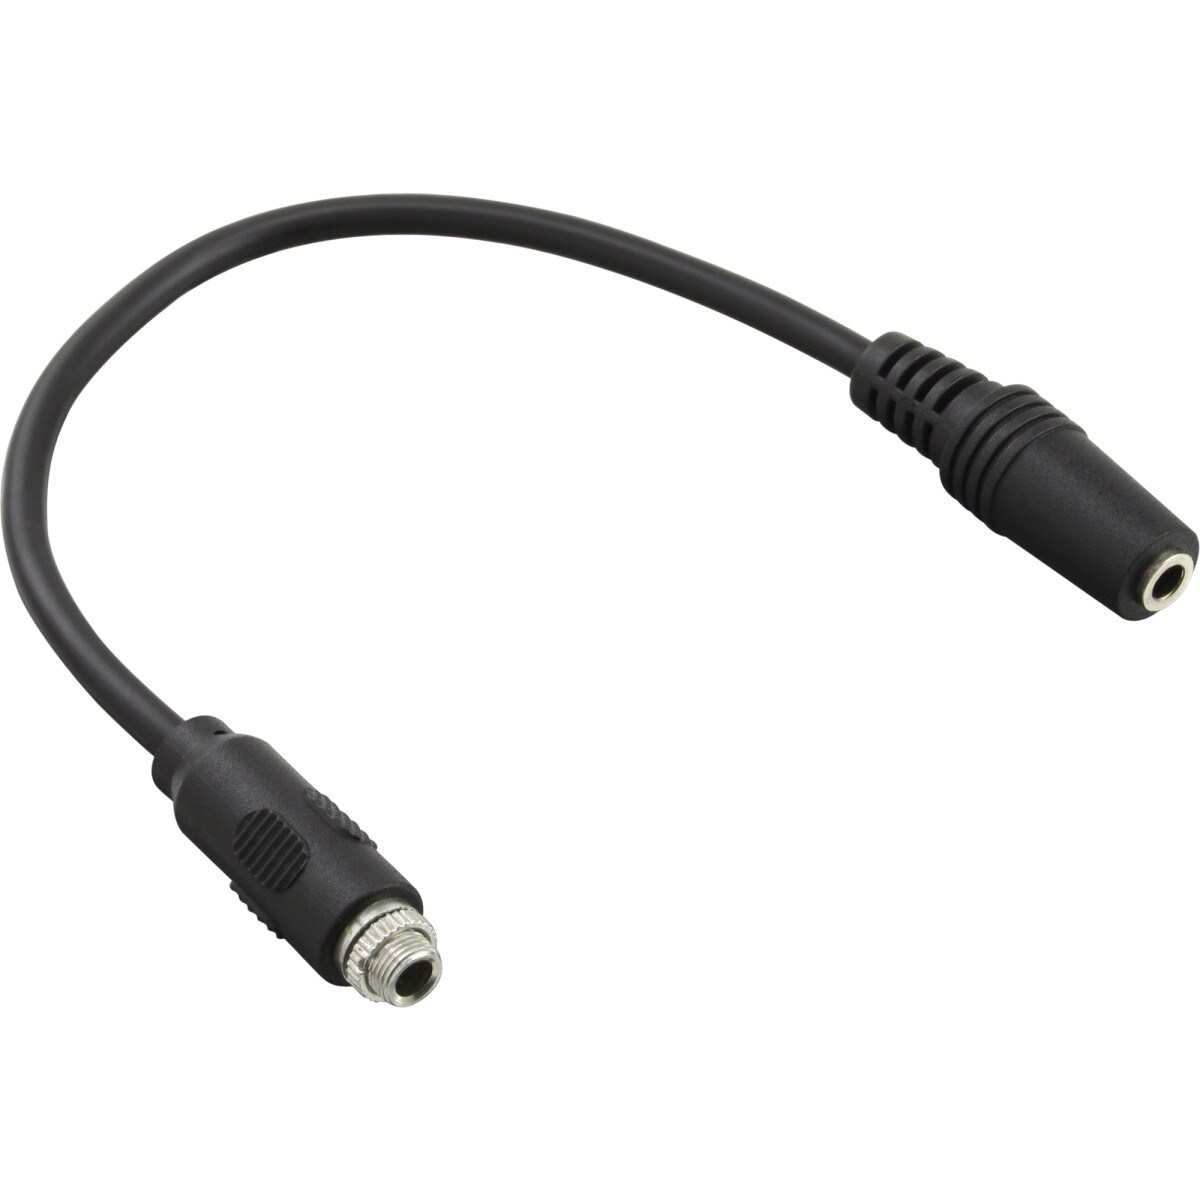 InLine® Audio adapter cable, 3.5mm Stereo female to...